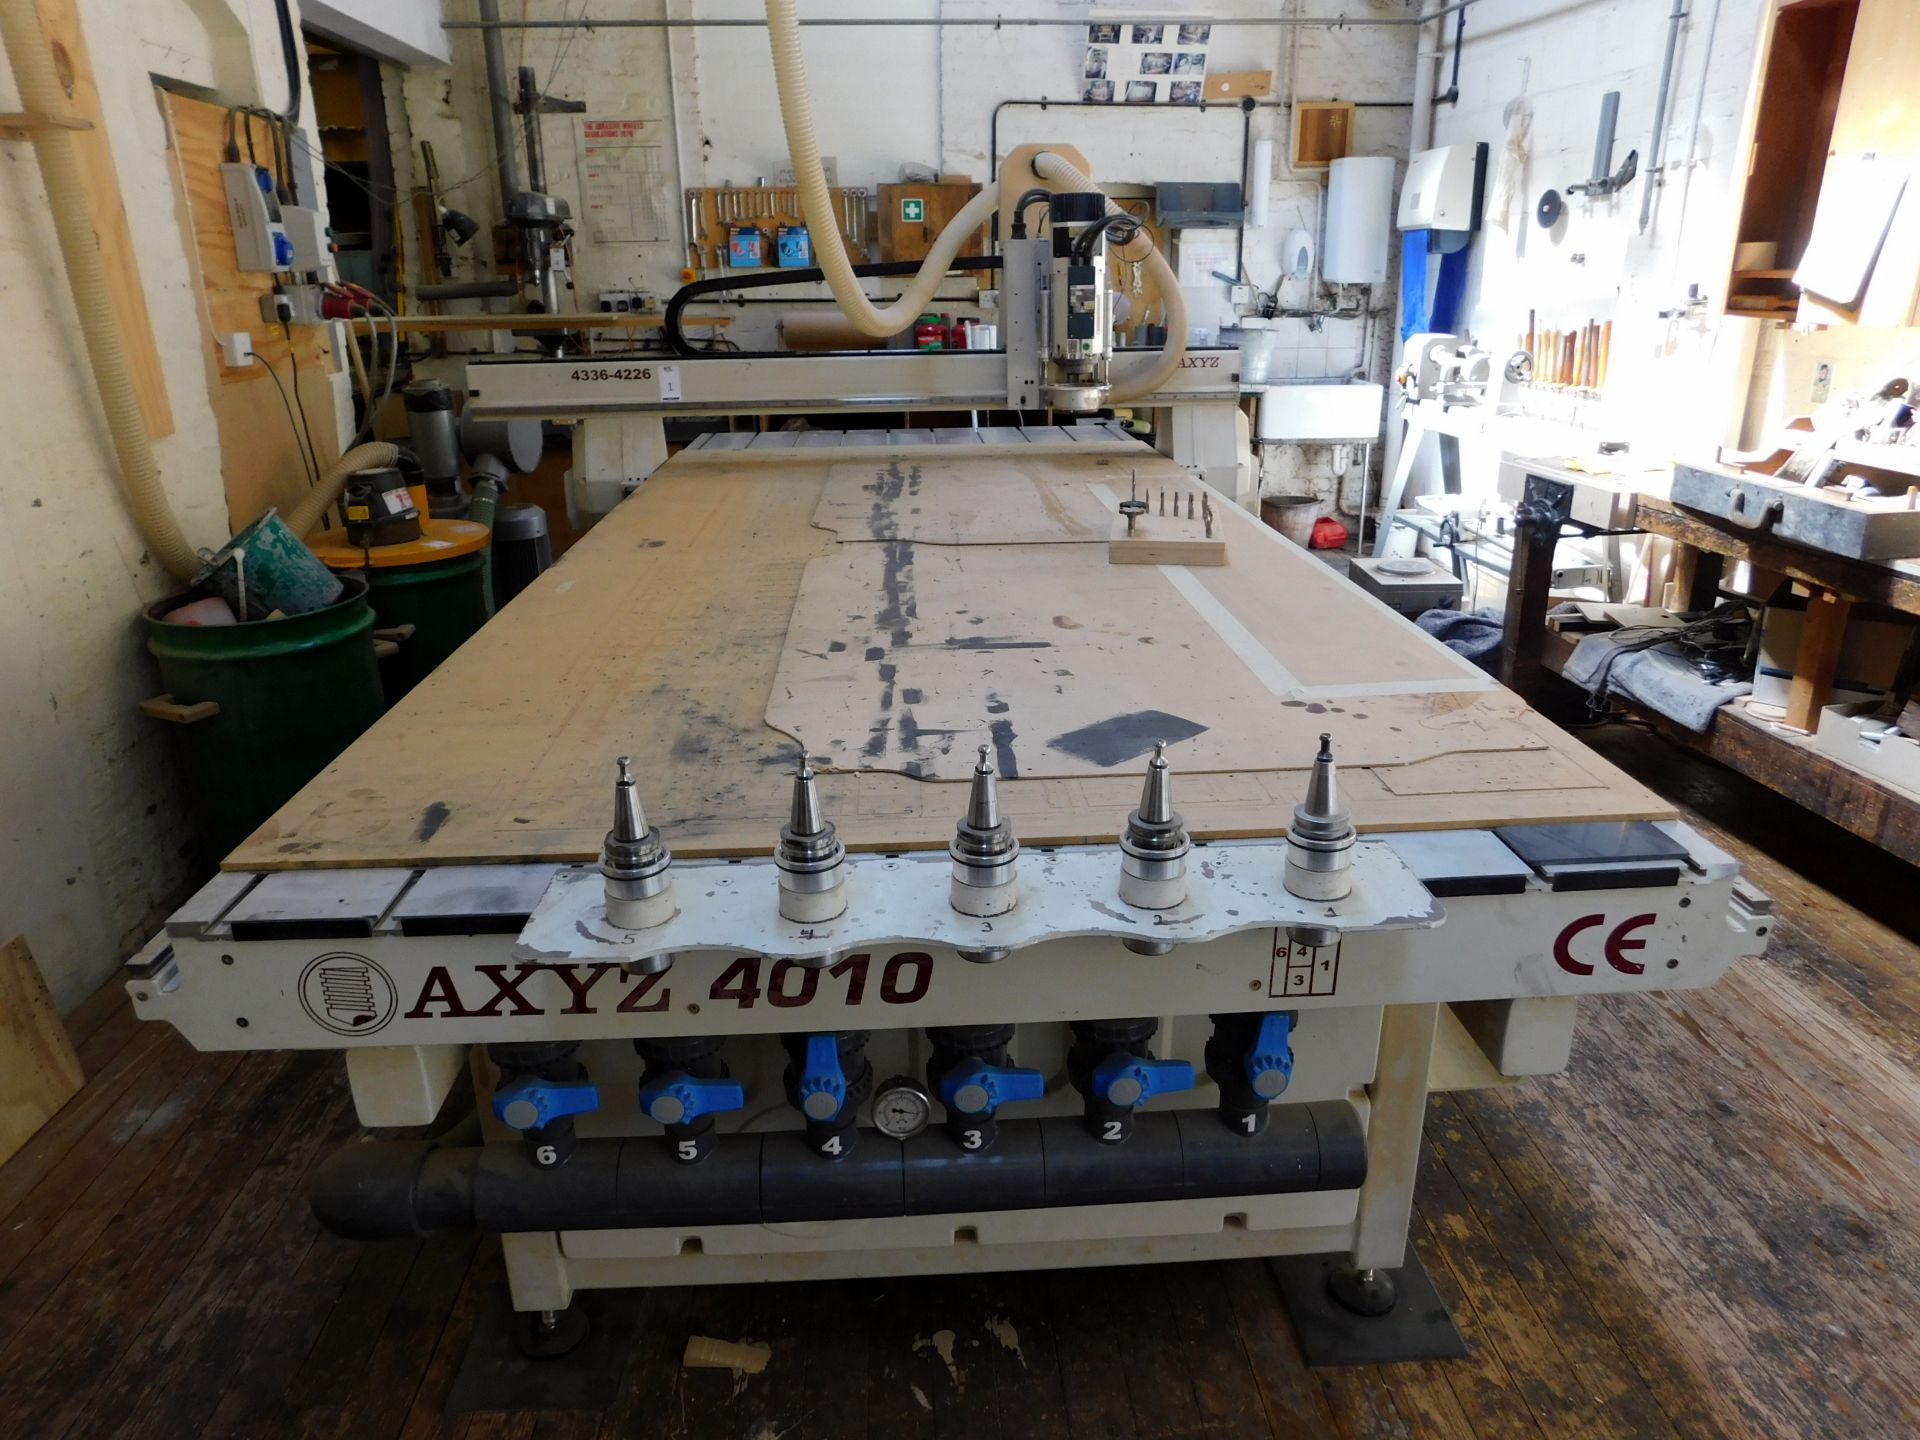 AXYZ 4010 CNC Router & Associated Tooling, Serial Number: 4226 (2011), Bed Dimensions 370cm x 153cm,